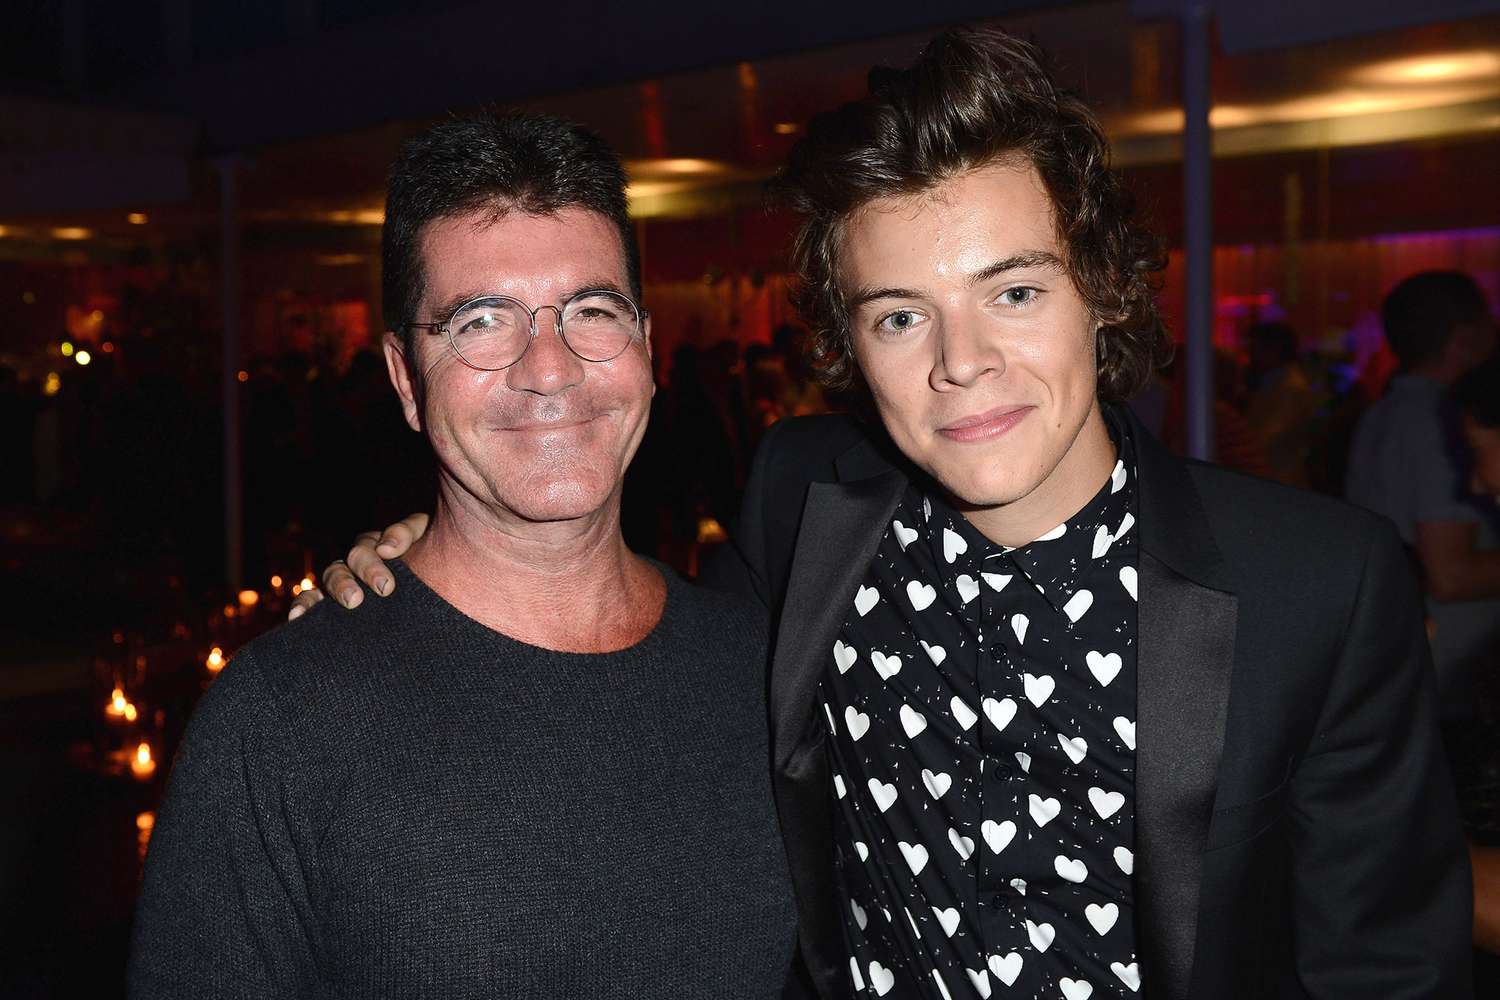 Simon Cowell and Harry Styles attend the "One Direction This Is Us" world premiere after party on August 20, 2013 in London, England.